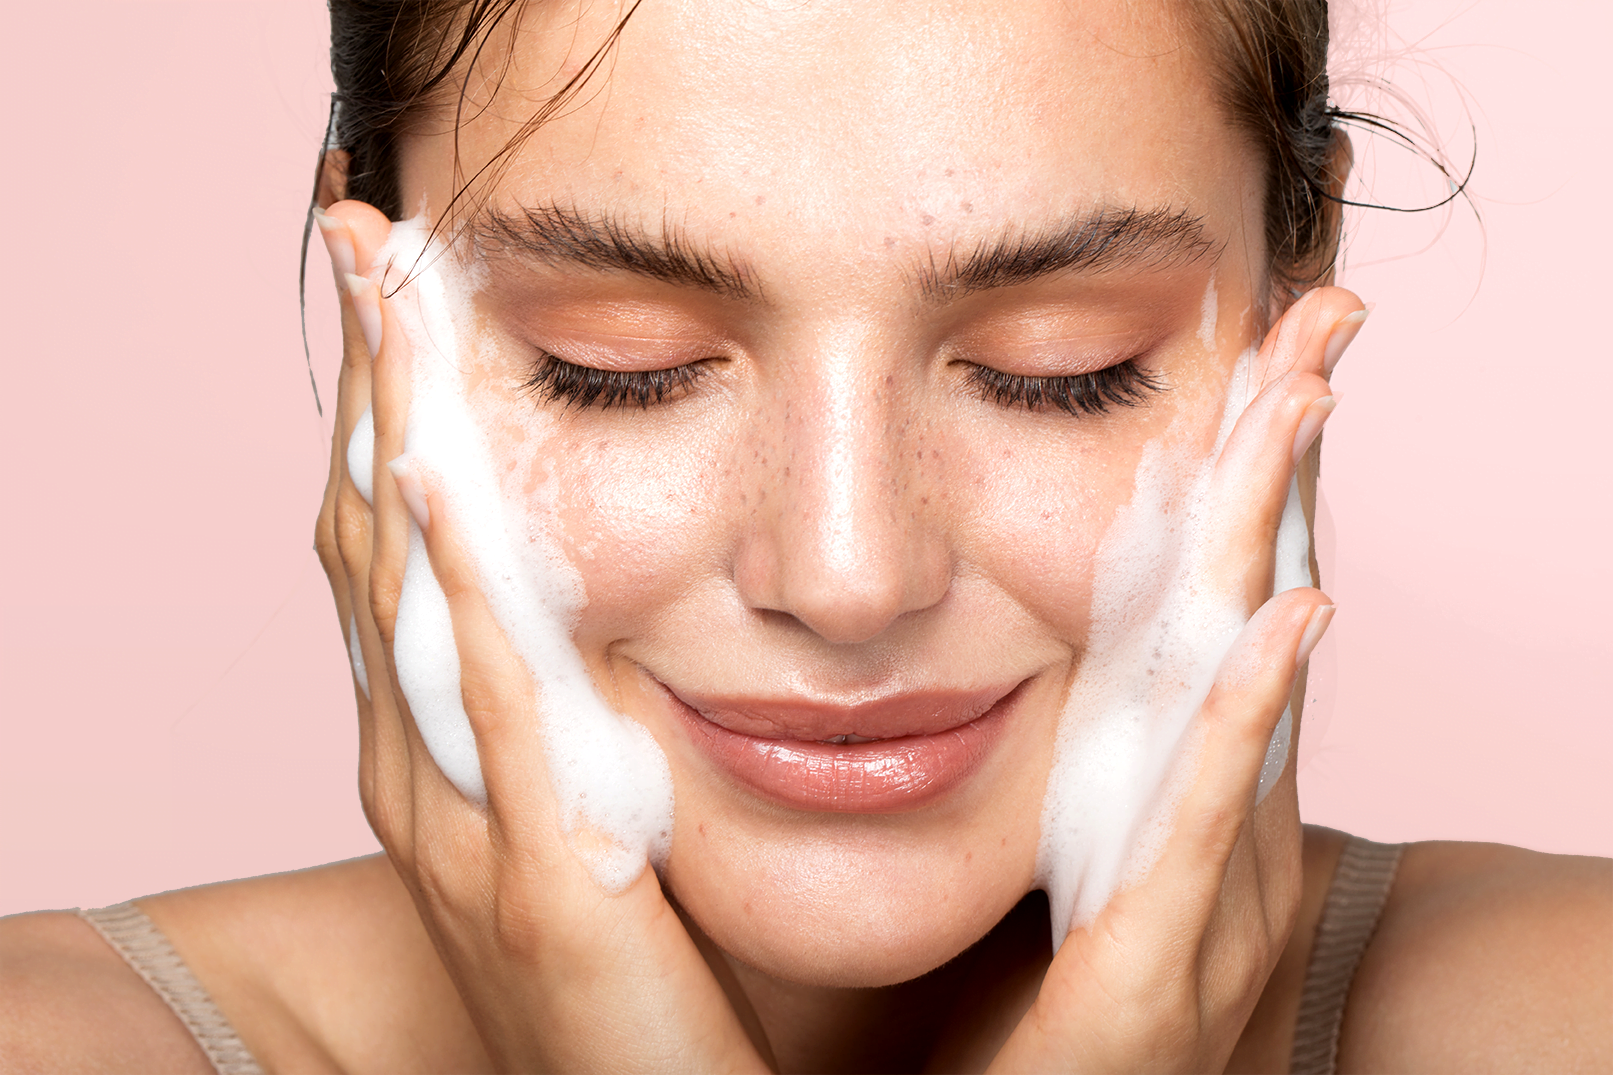 This skin care routine can minimize the appearance of pores in just 4 steps